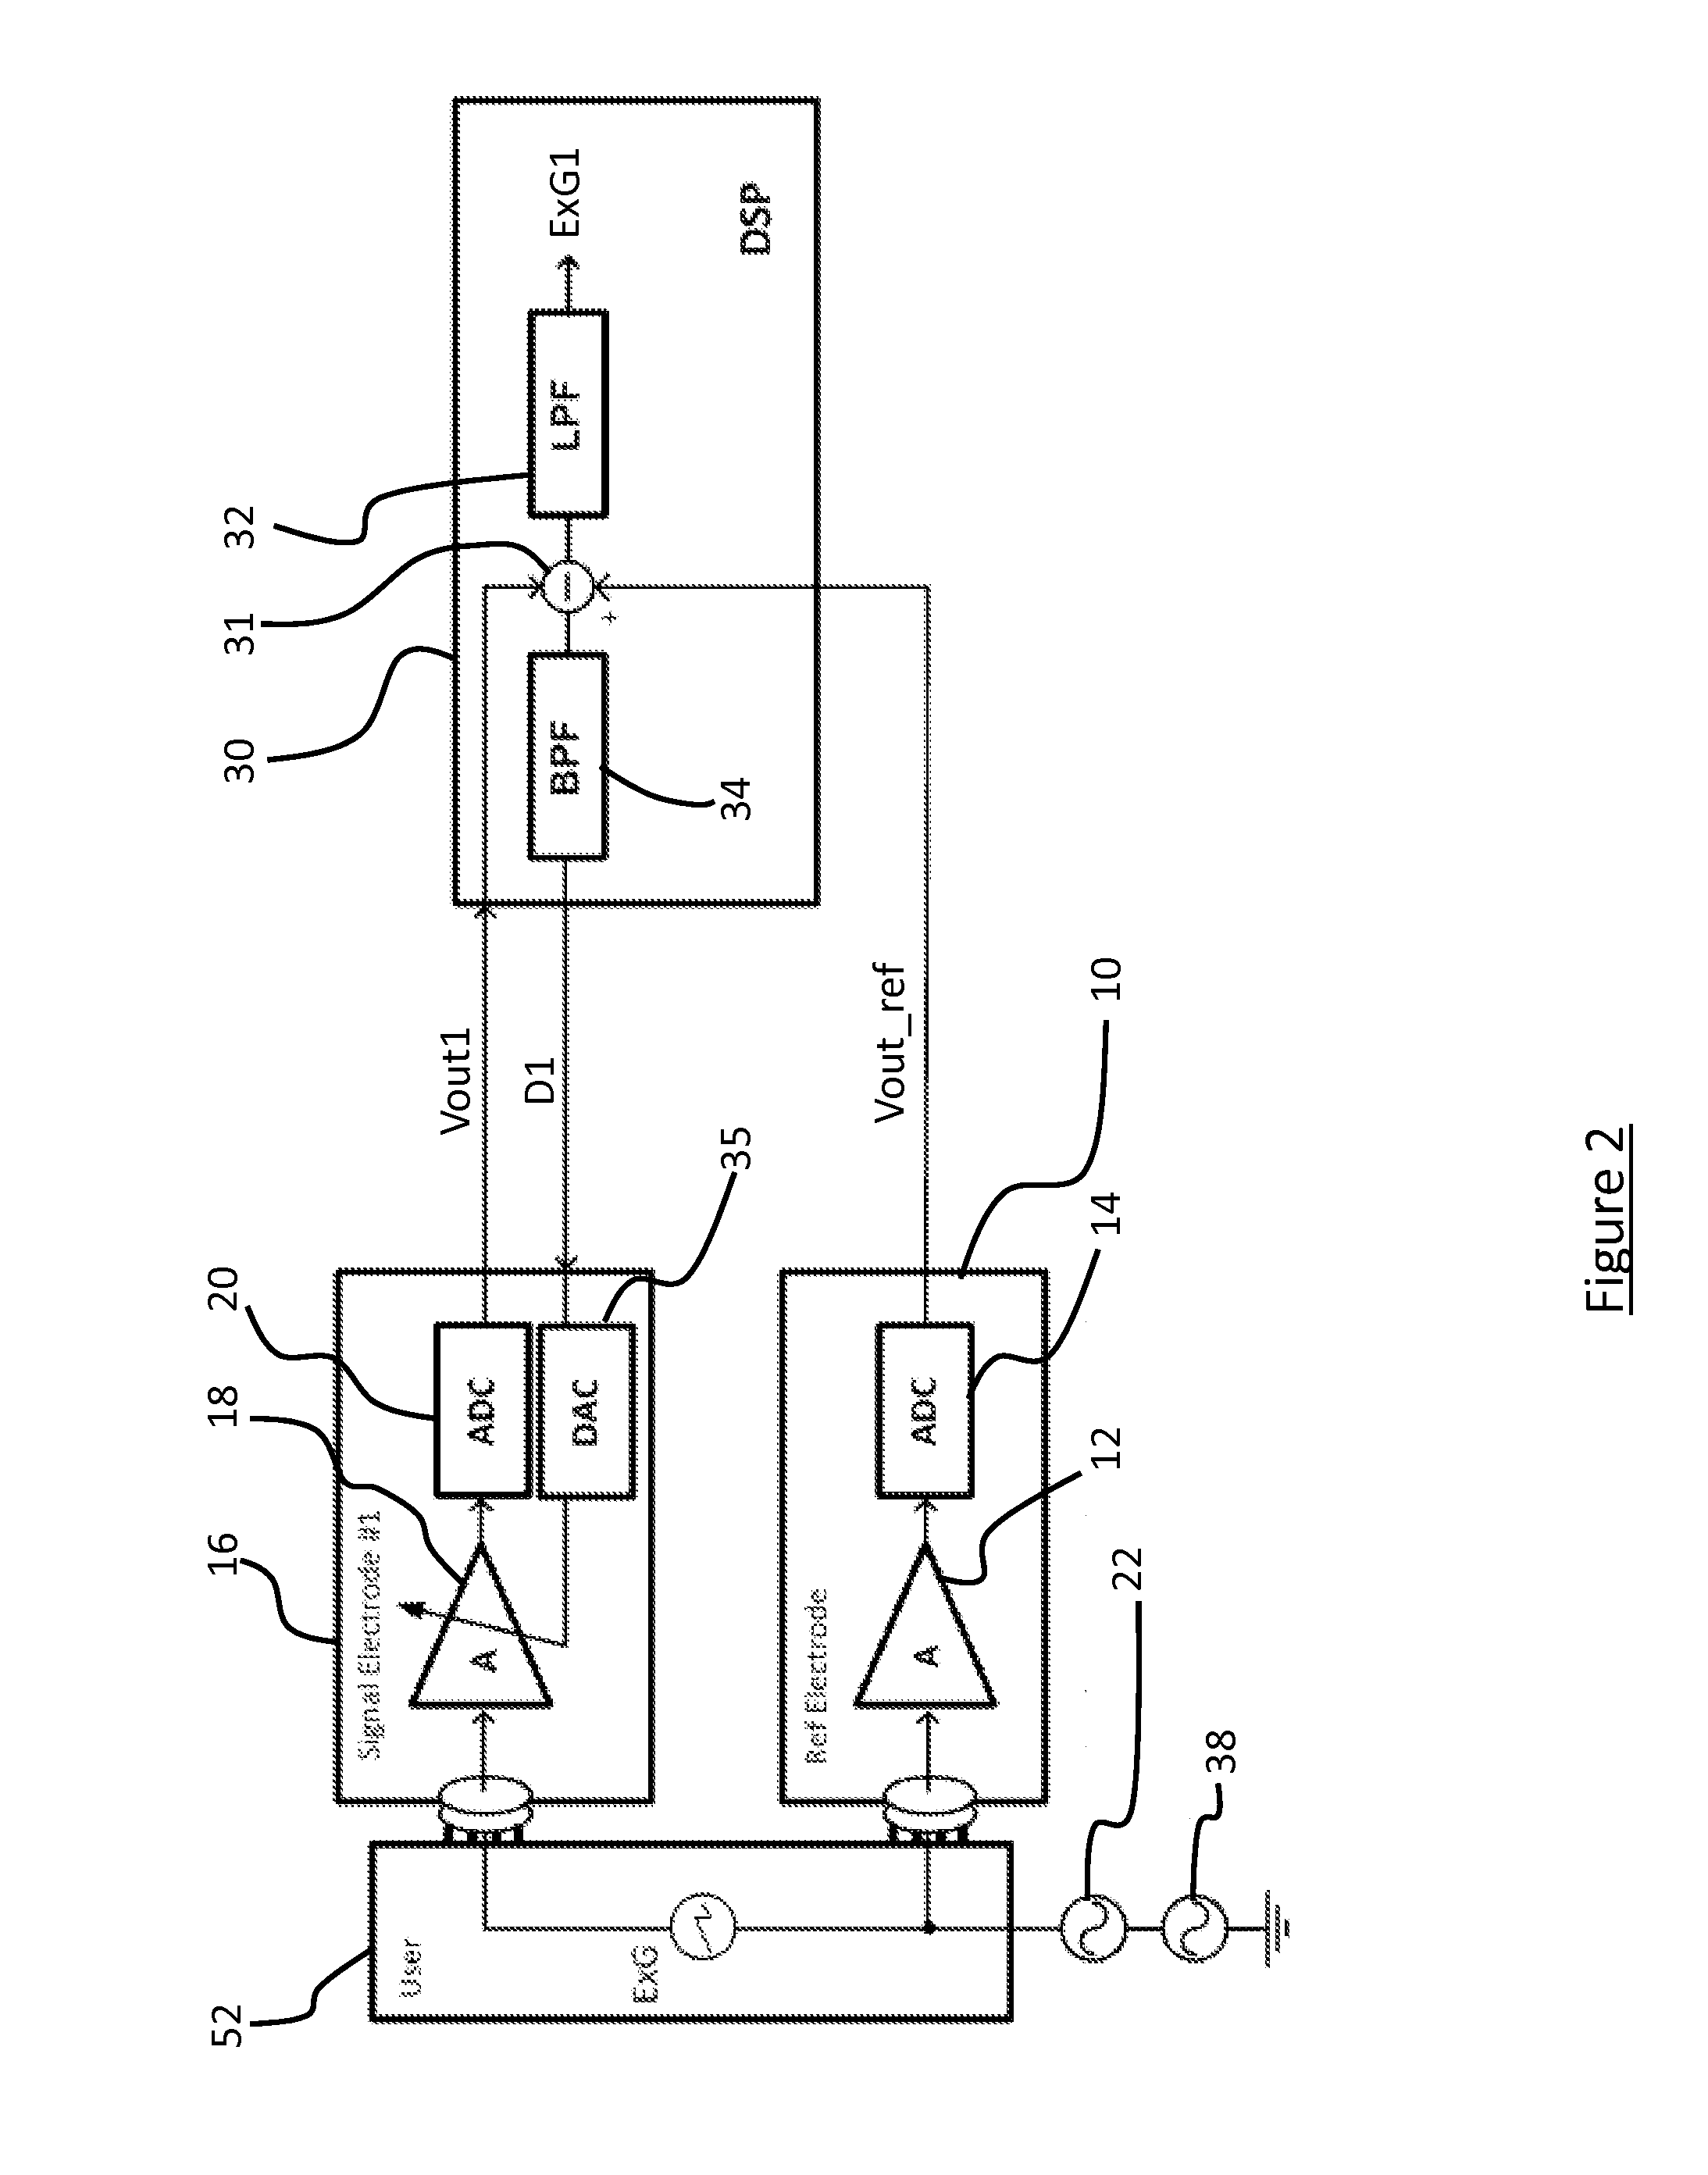 Biopotential Signal Acquisition System and Method